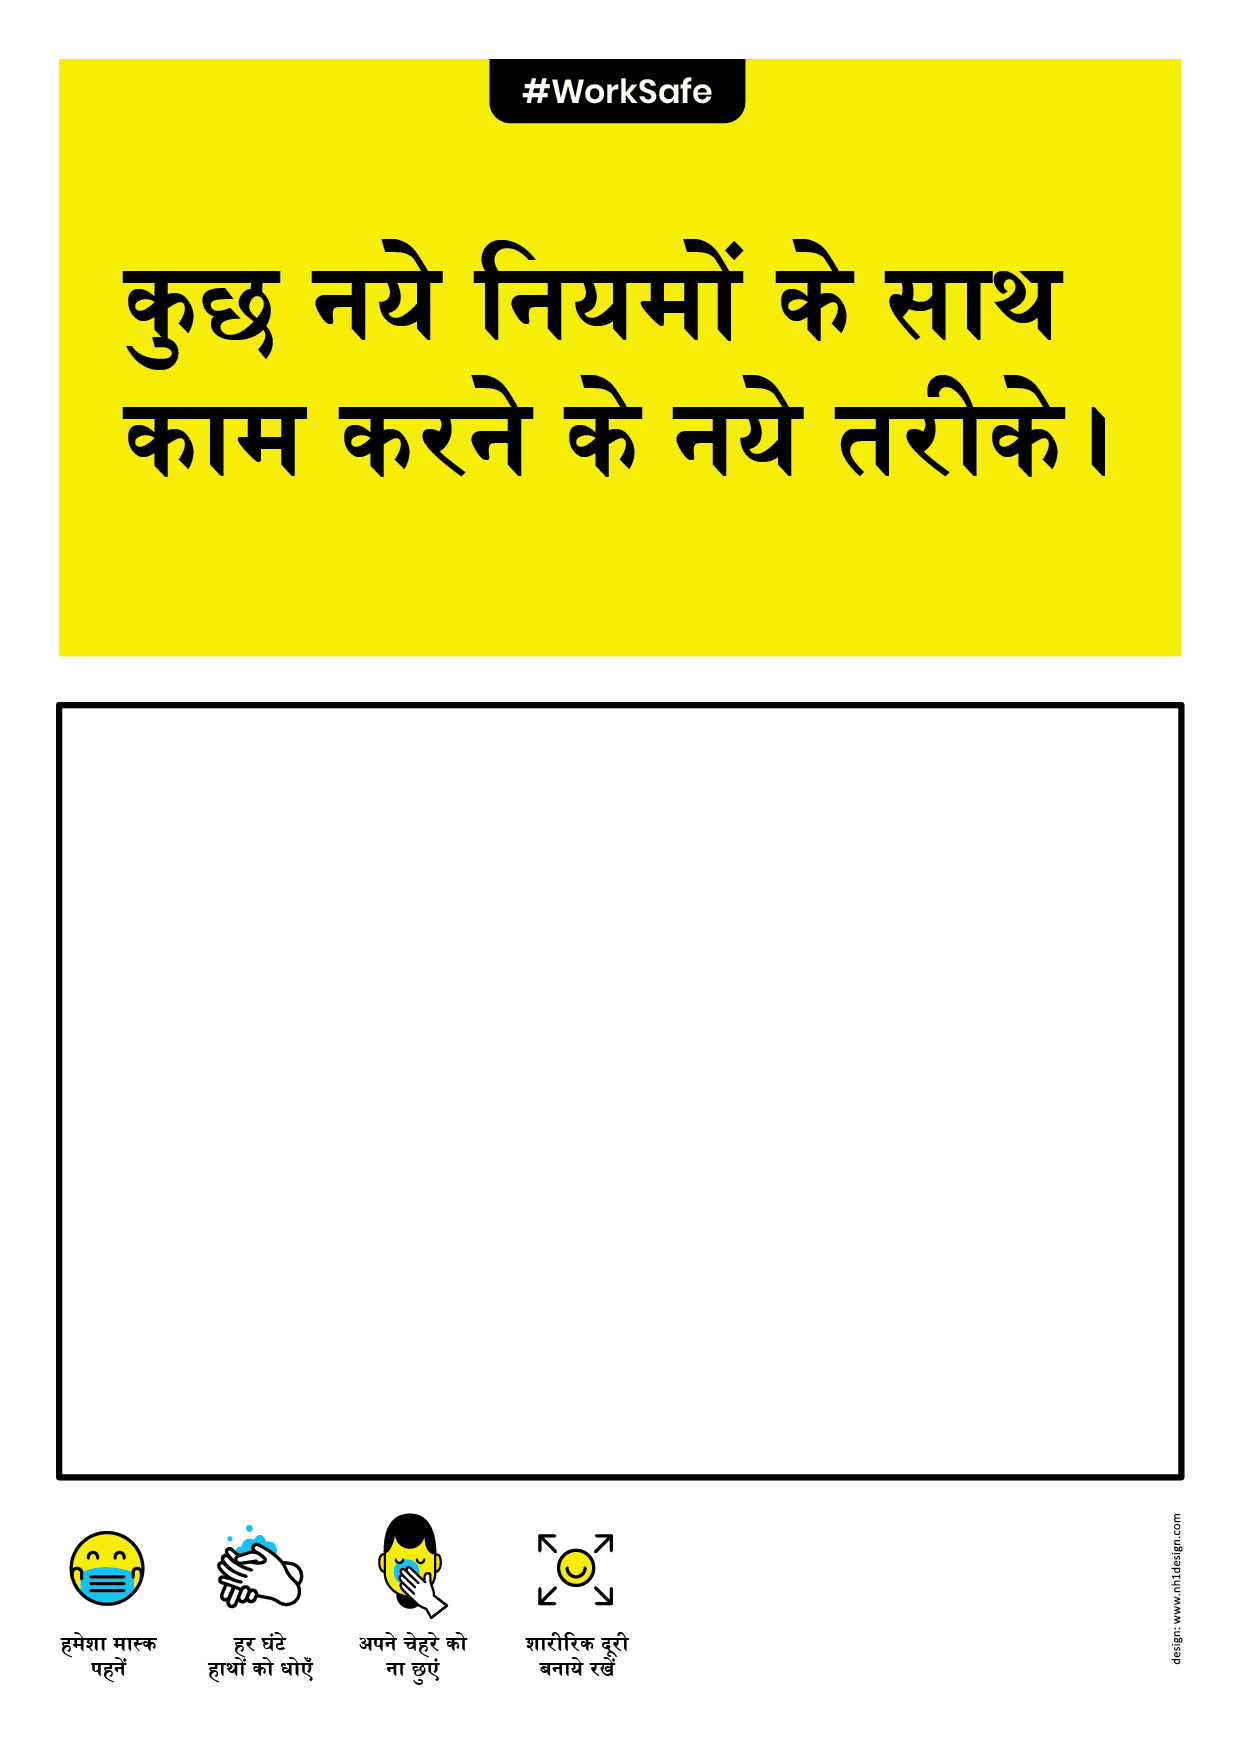 Business Rules Poster_HINDI-01